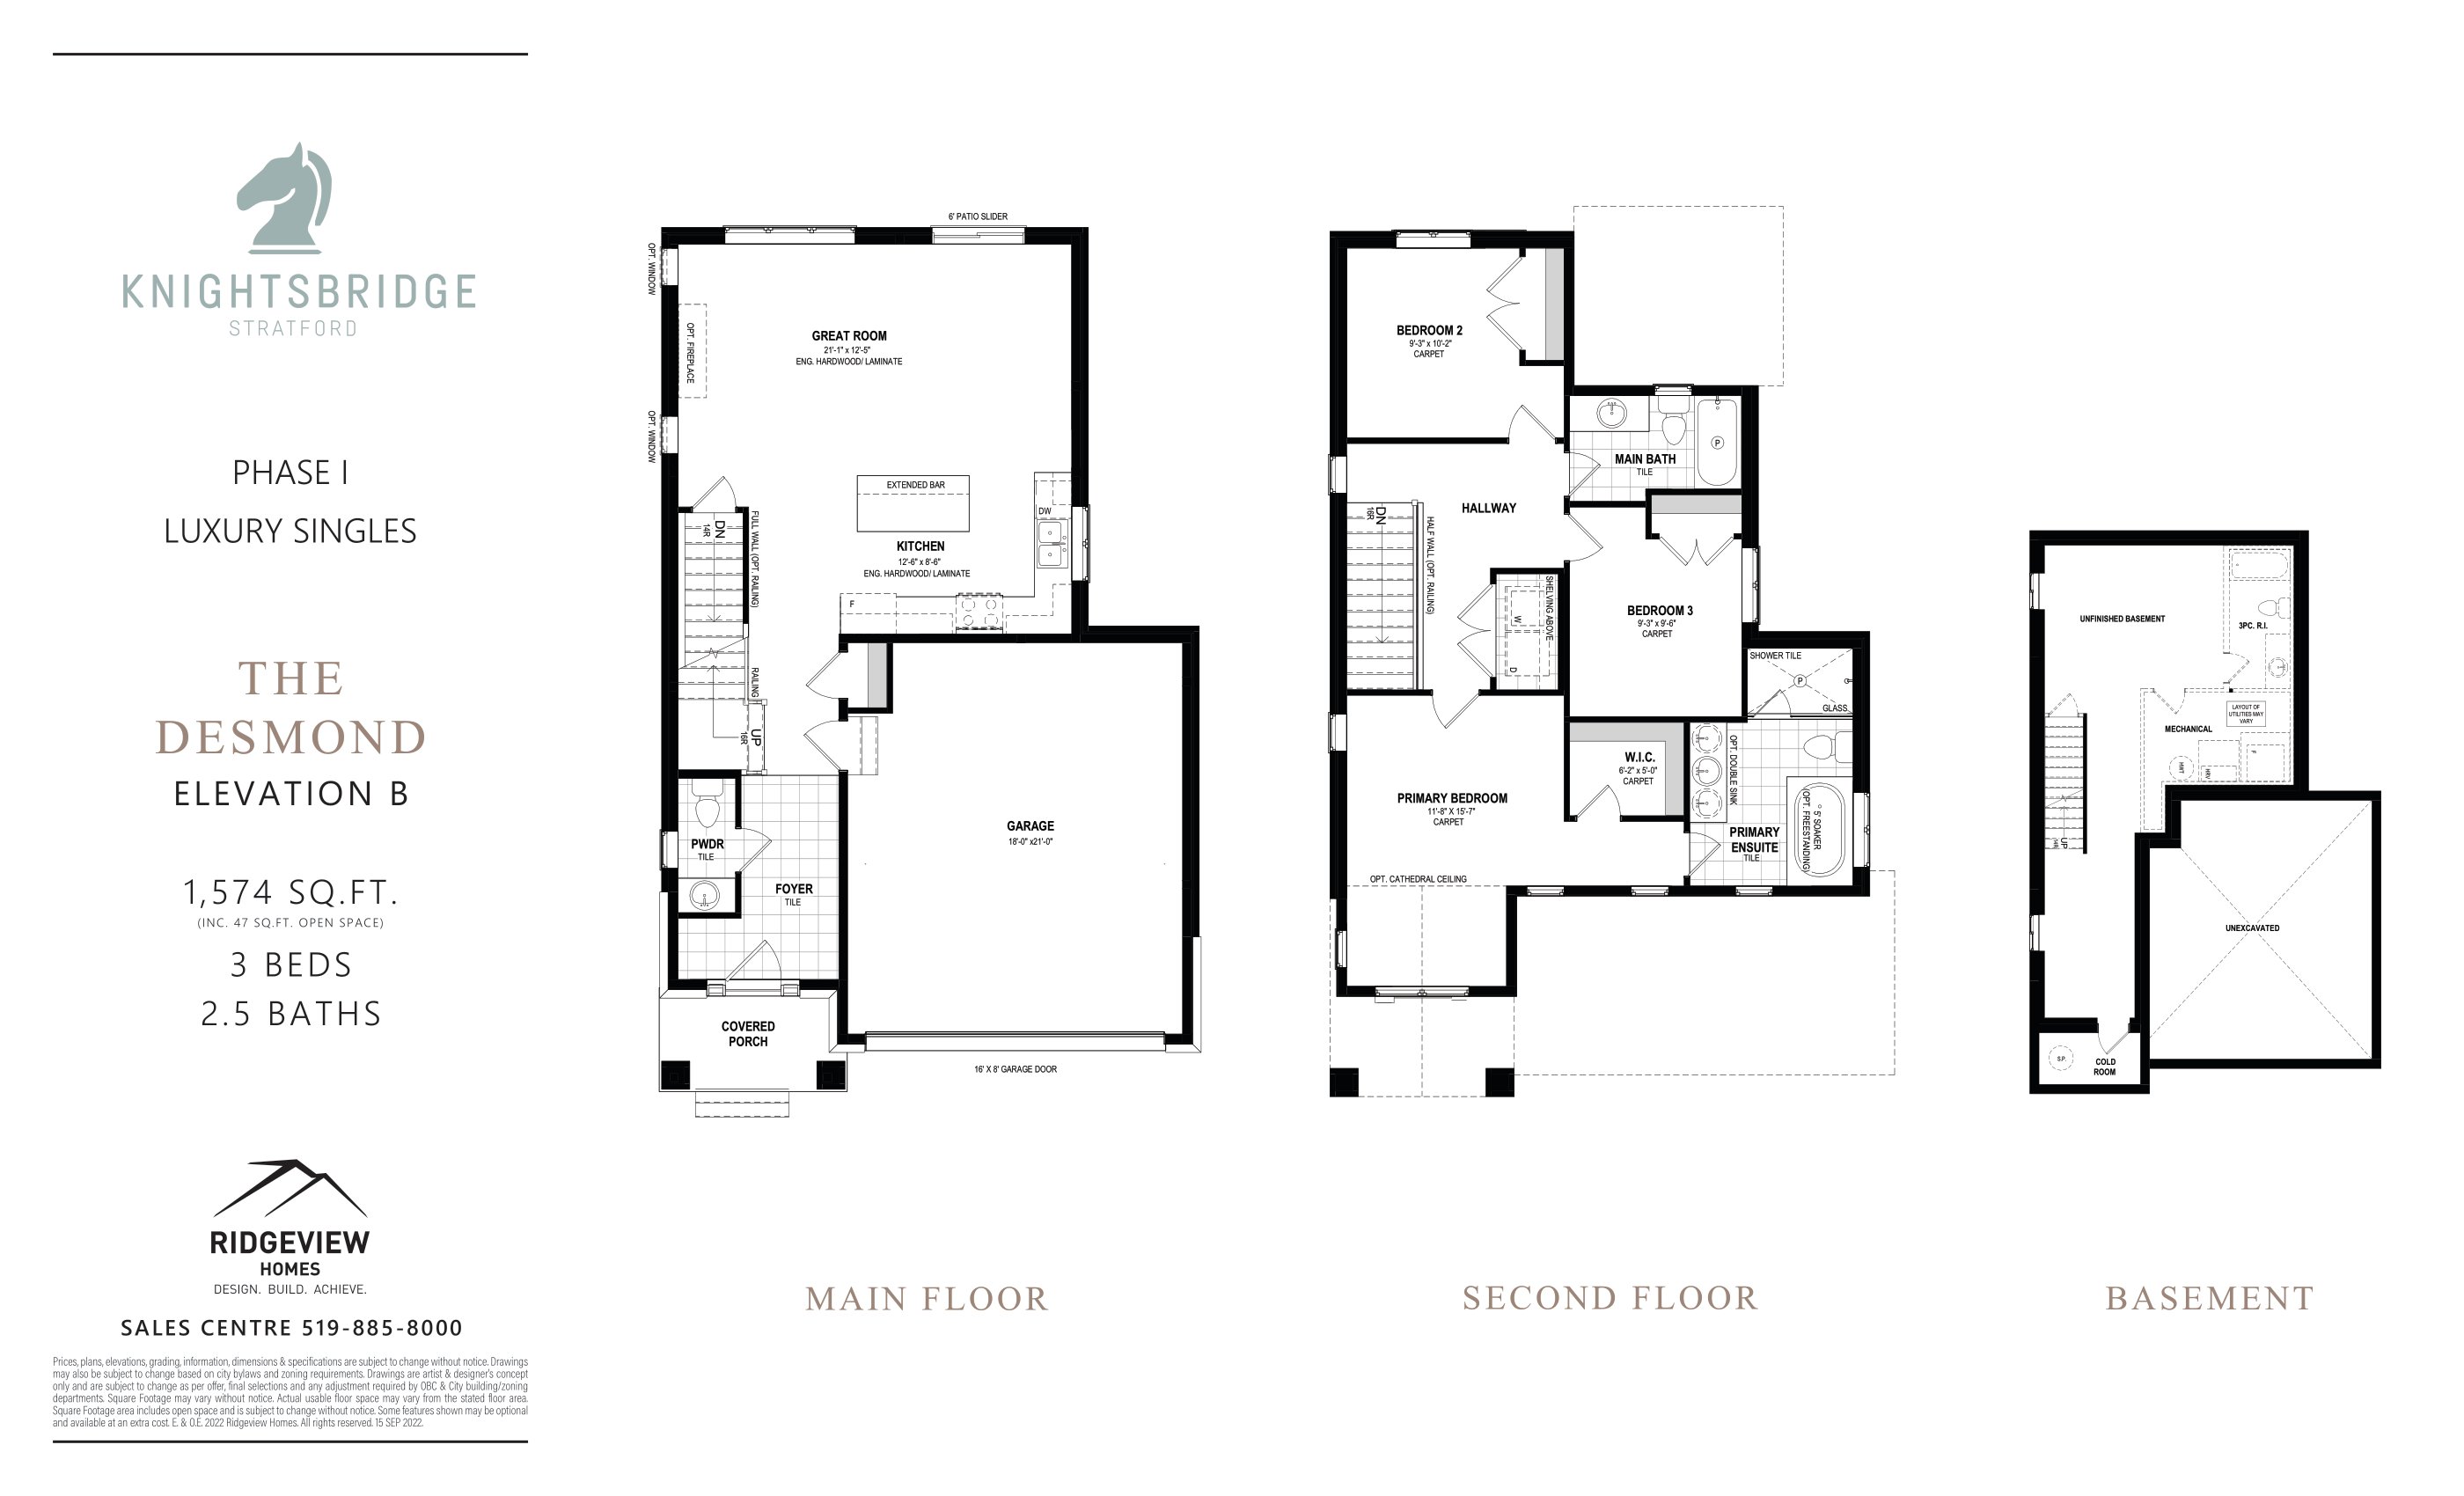  Floor Plan of Knightsbridge with undefined beds